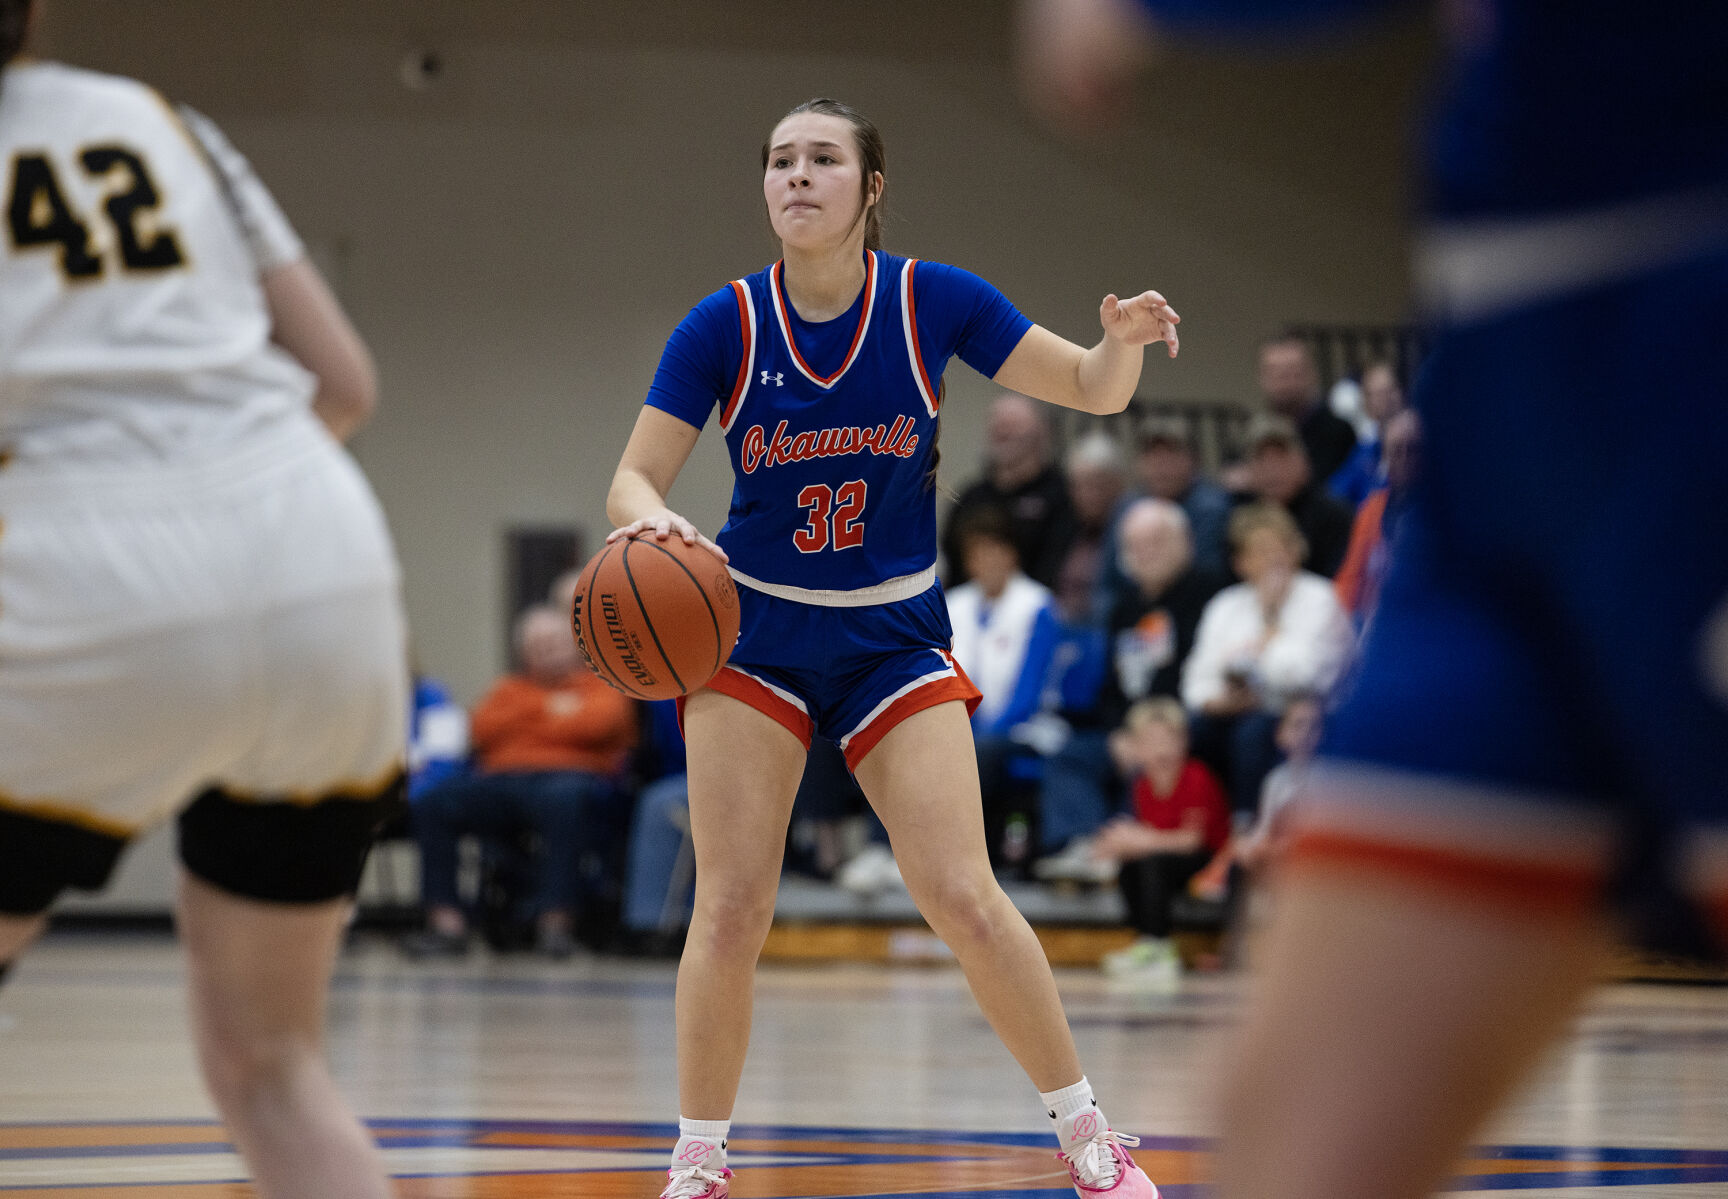 Okawville High Clinches State Semifinal with 44-30 Win and Senior Standout Performance